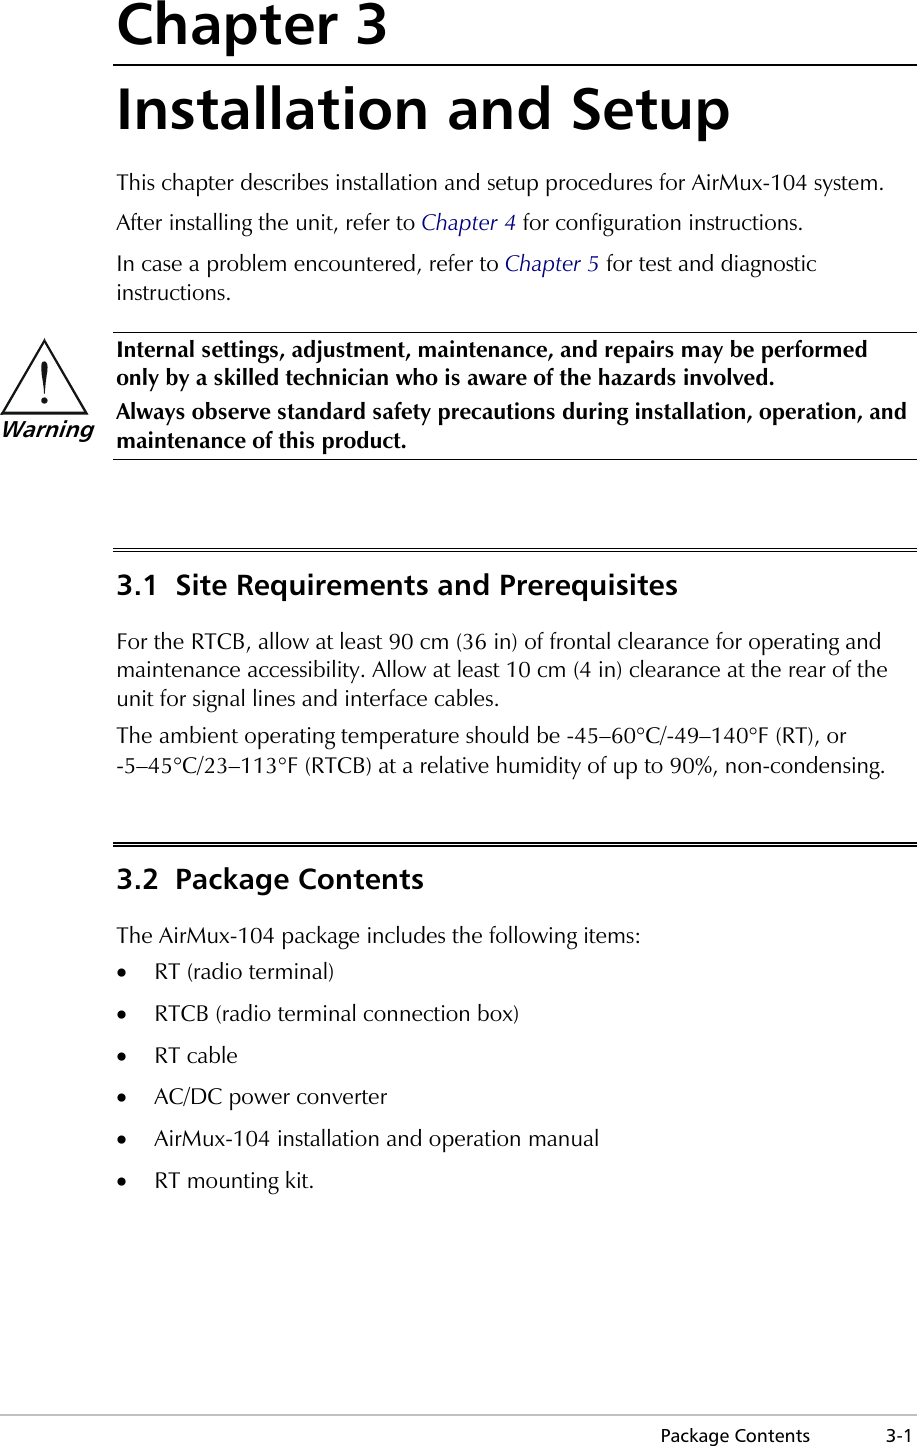  Package Contents  3-1 Chapter 3 Installation and Setup This chapter describes installation and setup procedures for AirMux-104 system. After installing the unit, refer to Chapter 4 for configuration instructions. In case a problem encountered, refer to Chapter 5 for test and diagnostic instructions.  Internal settings, adjustment, maintenance, and repairs may be performed only by a skilled technician who is aware of the hazards involved. Always observe standard safety precautions during installation, operation, and maintenance of this product.  3.1  Site Requirements and Prerequisites For the RTCB, allow at least 90 cm (36 in) of frontal clearance for operating and maintenance accessibility. Allow at least 10 cm (4 in) clearance at the rear of the unit for signal lines and interface cables. The ambient operating temperature should be -45–60°C/-49–140°F (RT), or -5–45°C/23–113°F (RTCB) at a relative humidity of up to 90%, non-condensing. 3.2 Package Contents The AirMux-104 package includes the following items: •  RT (radio terminal) •  RTCB (radio terminal connection box) •  RT cable •  AC/DC power converter •  AirMux-104 installation and operation manual •  RT mounting kit. Warning 